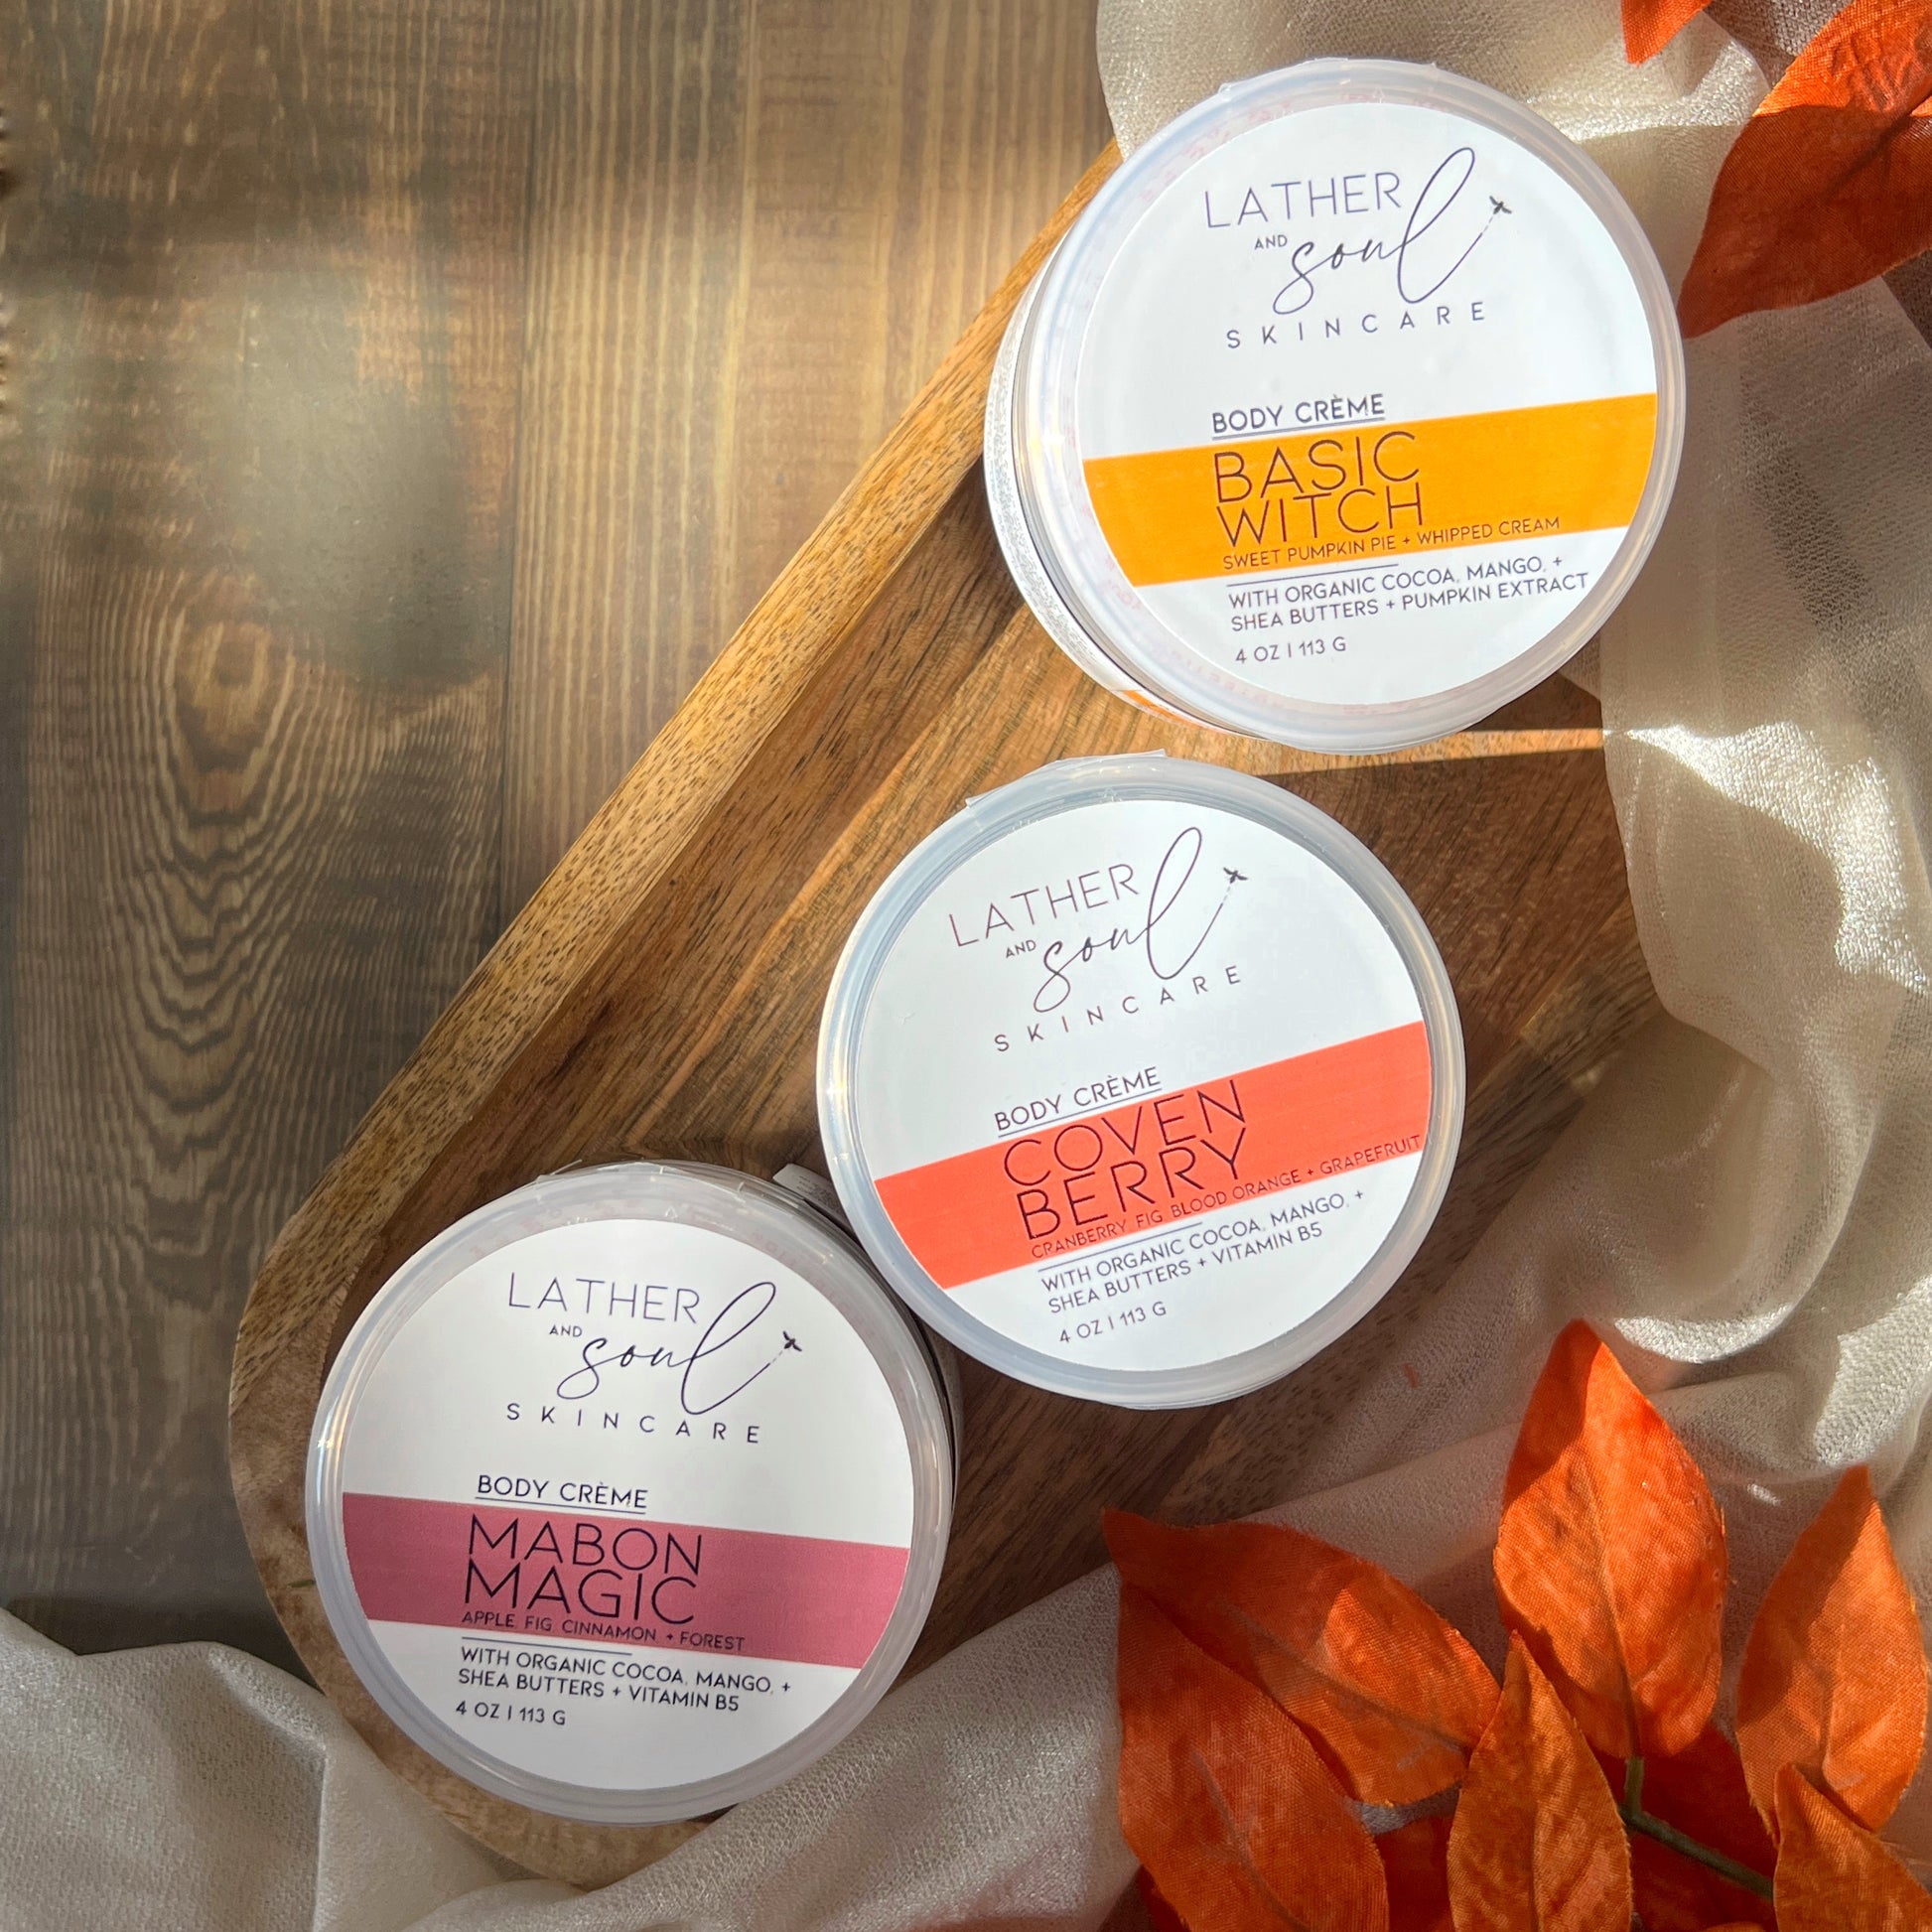 The Fall Collection of bdoy crèmes from Lather and Soul